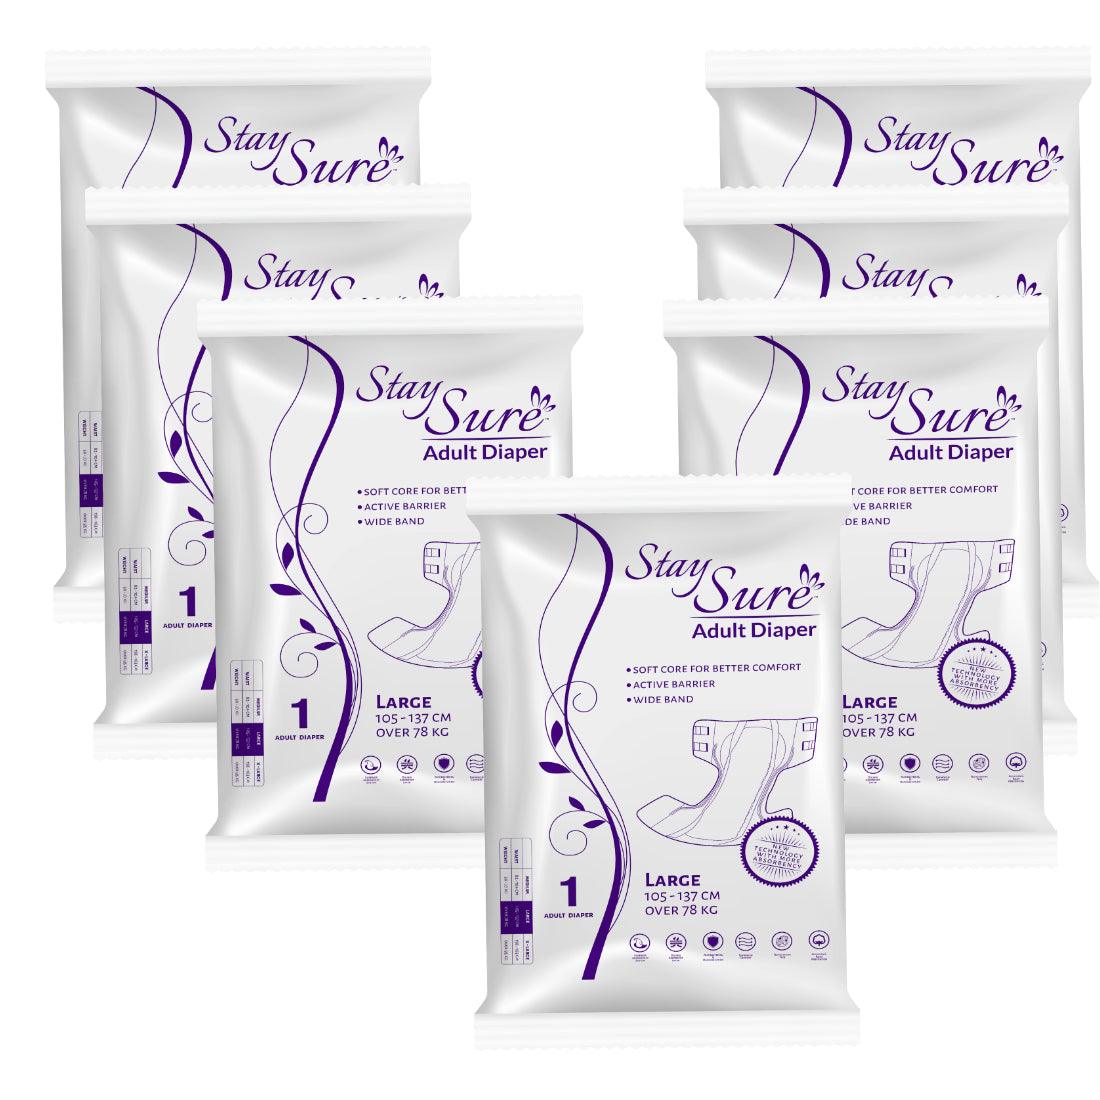 Stay sure adult diaper sticking type large premium plus 1pc travel pack of 7 packet - staysure.asia